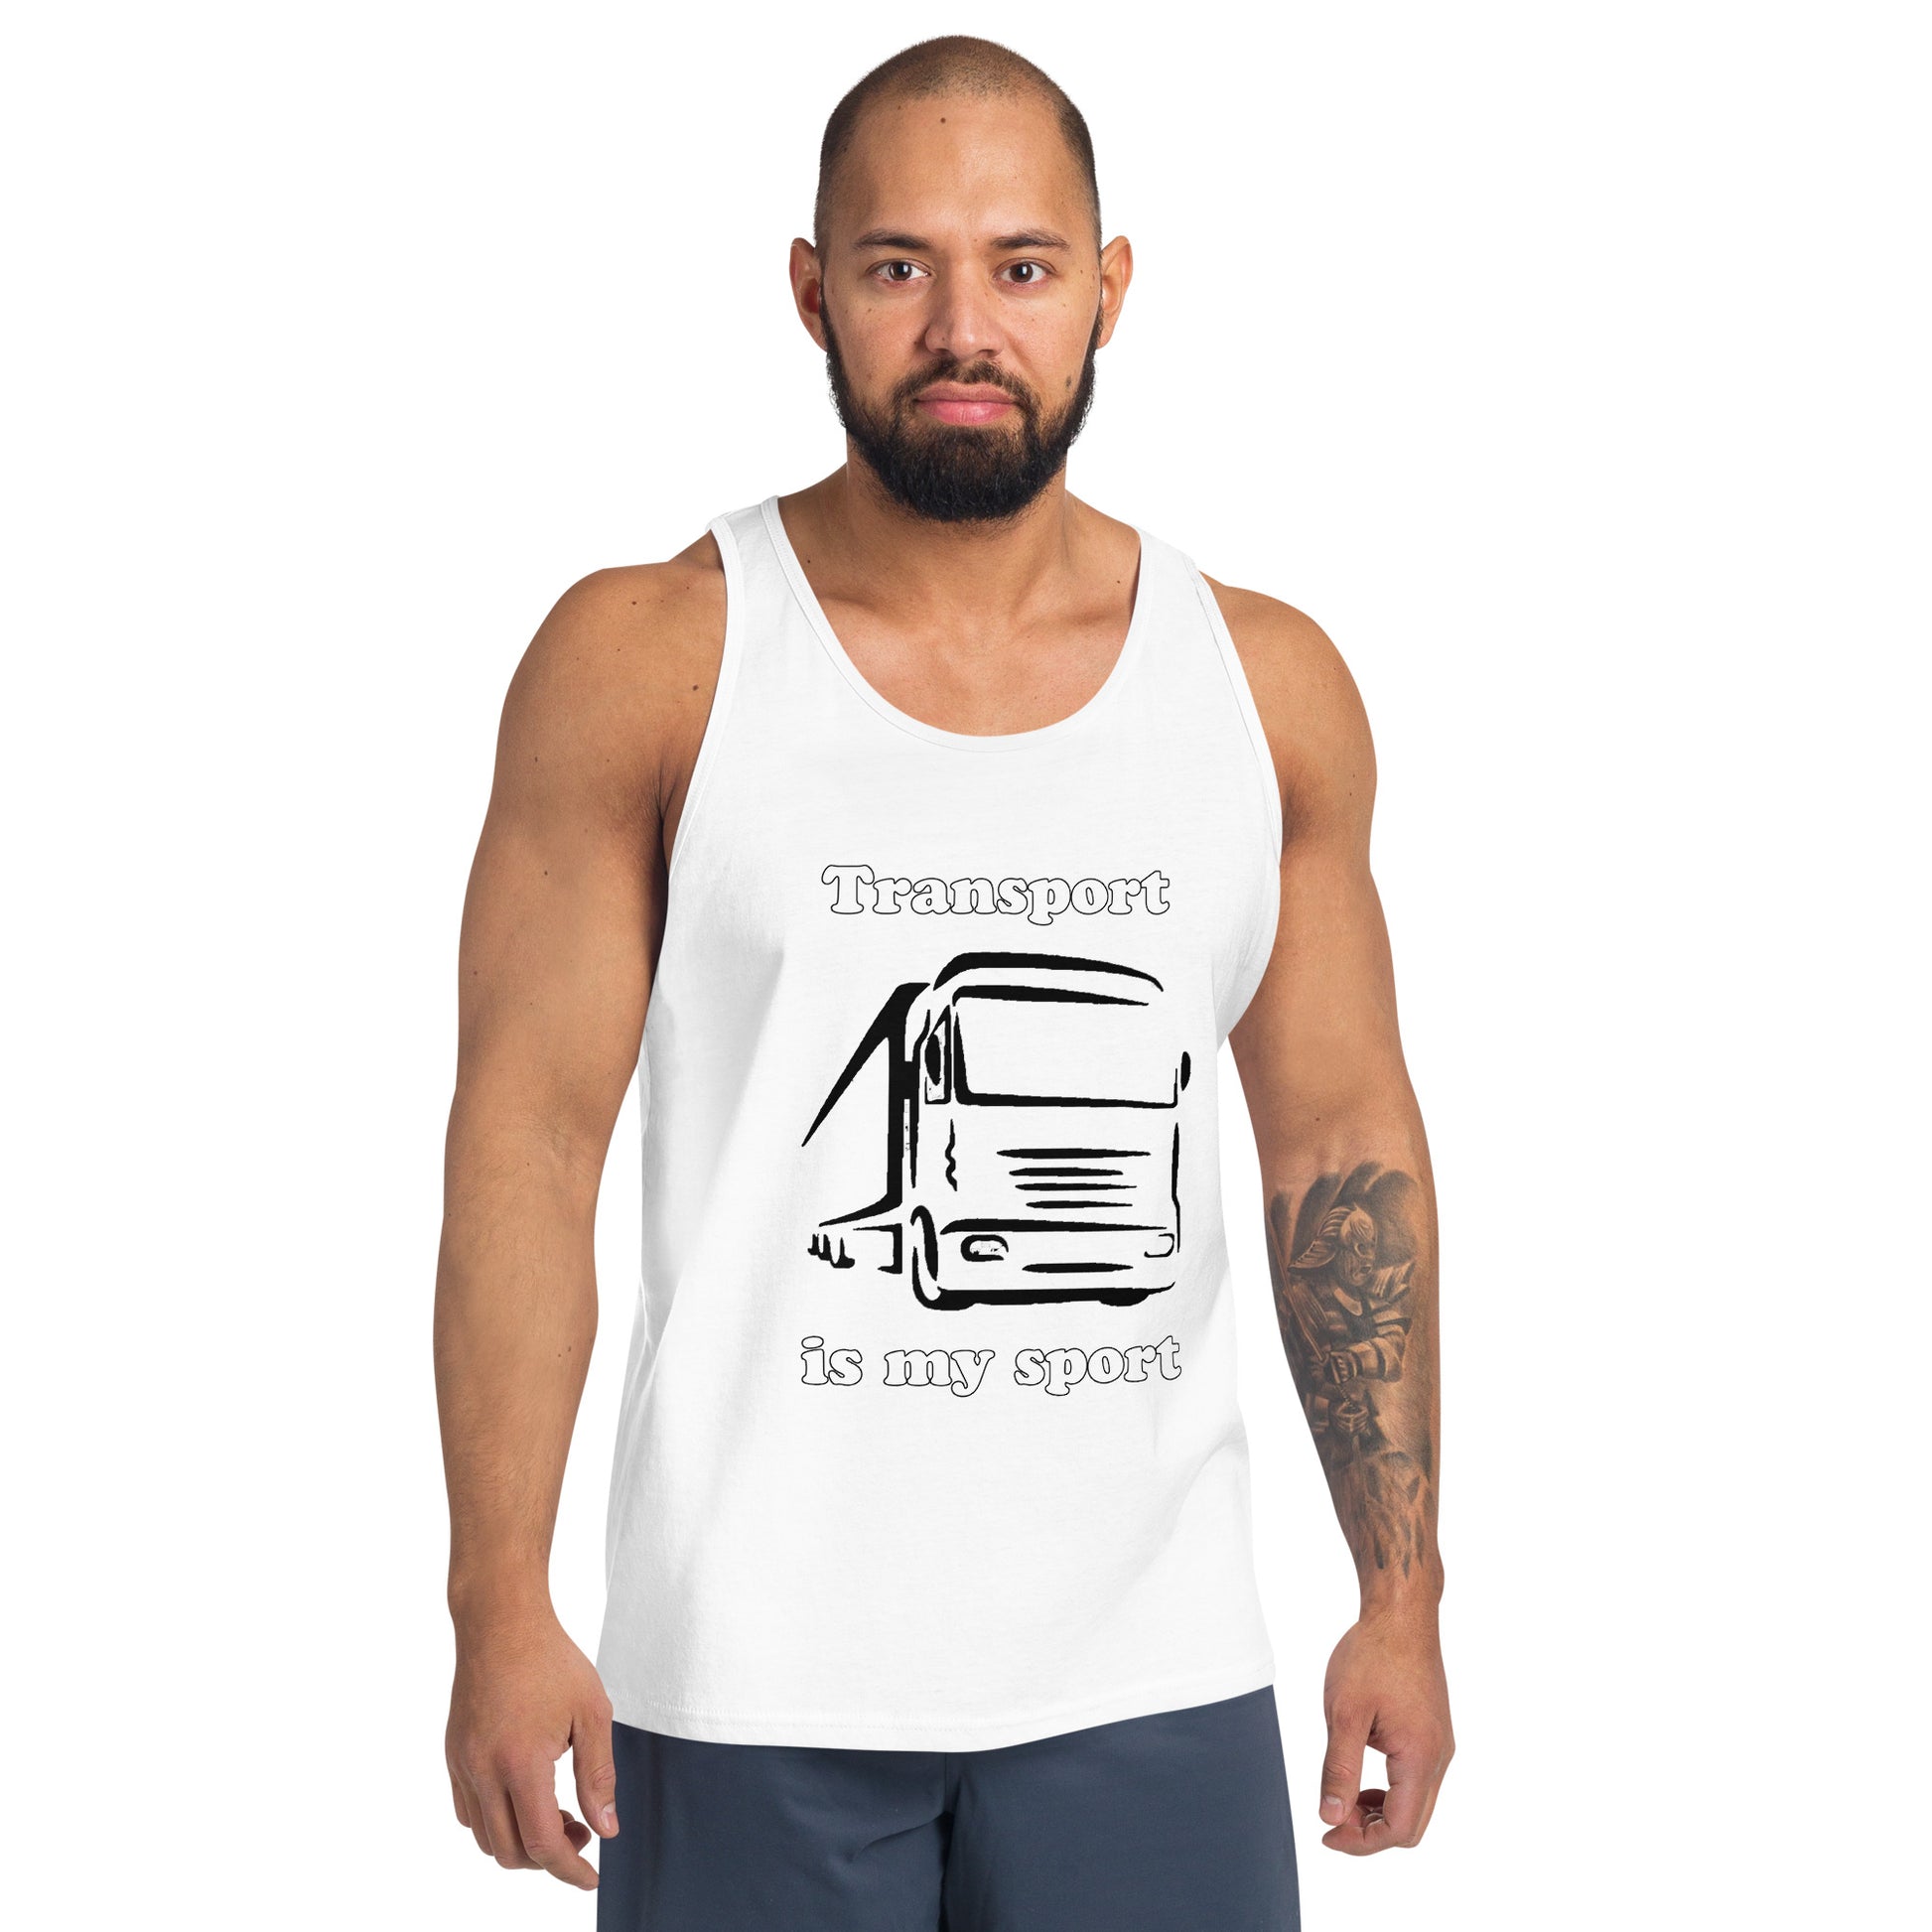 Man with white tank top with picture of truck and text "Transport is my sport"